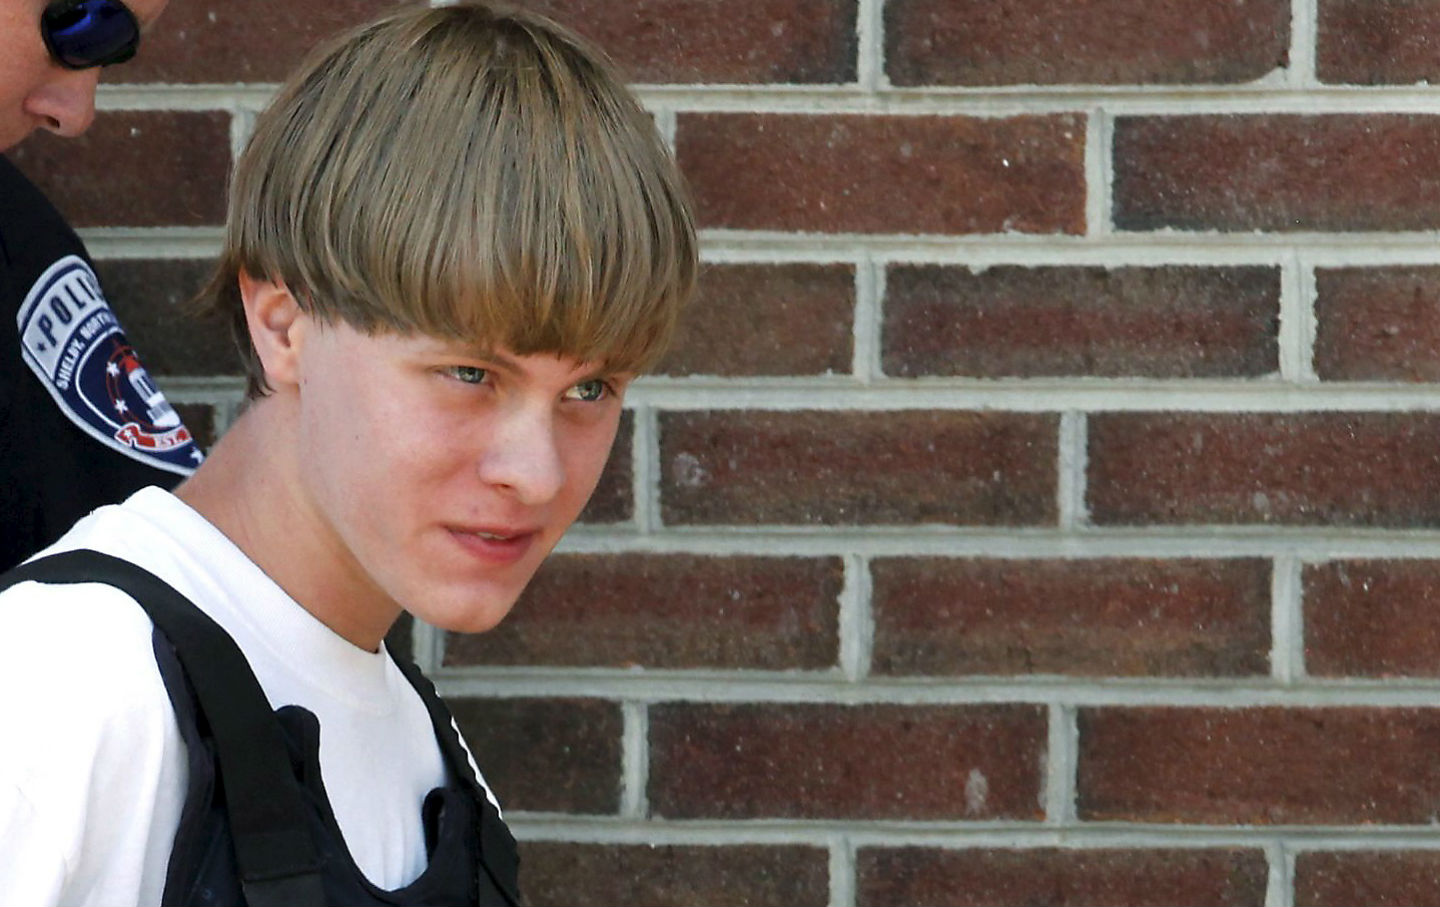 Police lead suspected shooter Dylann Roof, 21, into the courthouse in Shelby, North Carolina, June 18, 2015. Roof, a 21-year-old with a criminal record, is accused of killing nine people at a Bible-study meeting in a historic African-American church in Charleston, South Carolina.